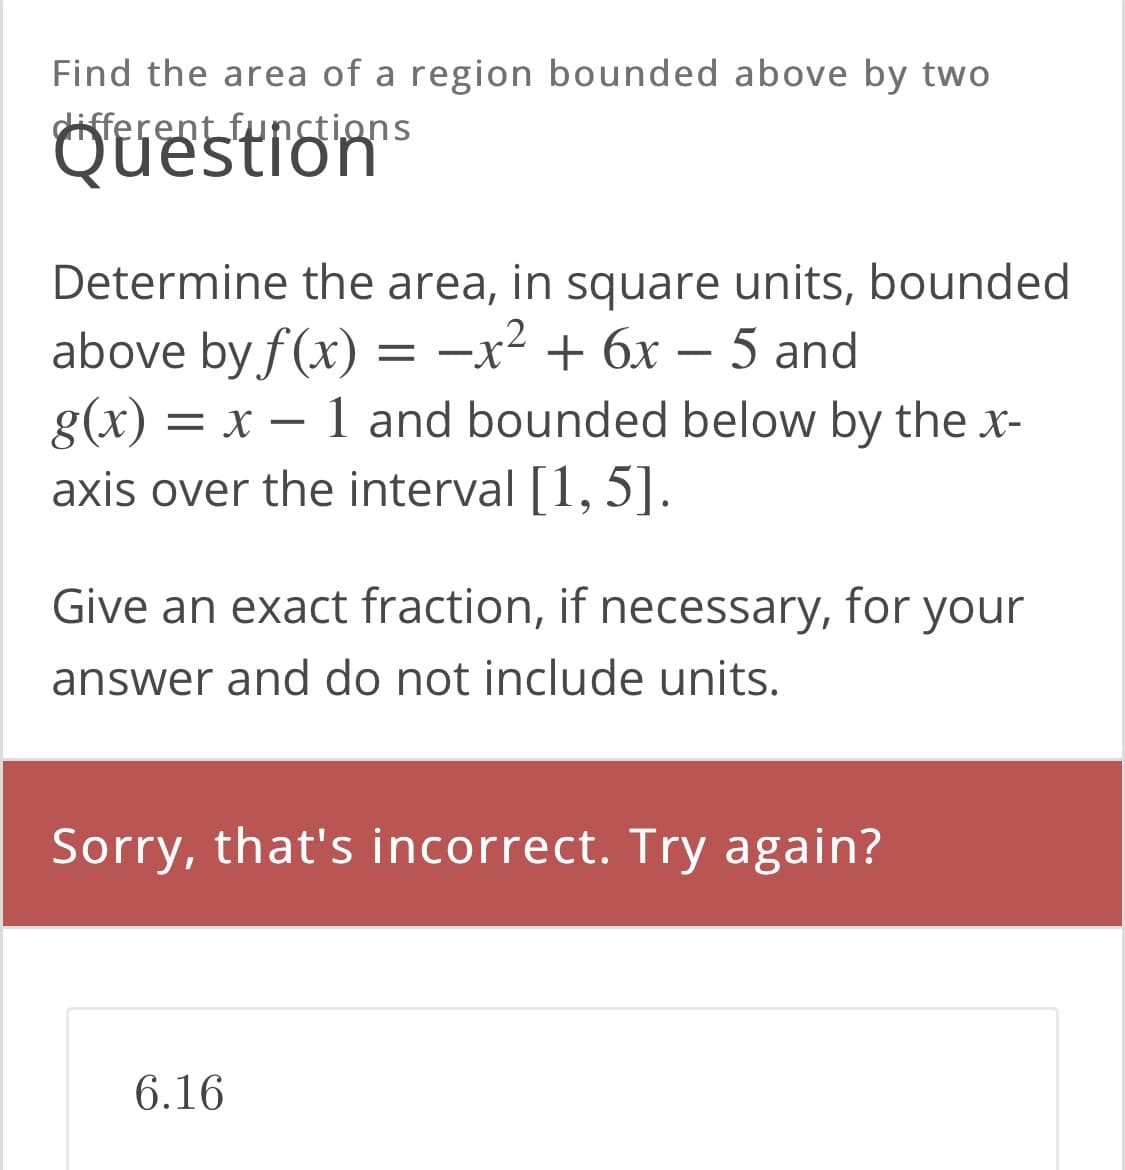 Find the area of a region bounded above by two
different funstions
Questrons
Determine the area, in square units, bounded
above by f(x)
g(x) =
axis over the interval [1, 5].
.2
-x + 6x – 5 and
||
x – 1 and bounded below by the x-
Give an exact fraction, if necessary, for your
answer and do not include units.
Sorry, that's incorrect. Try again?
6.16
